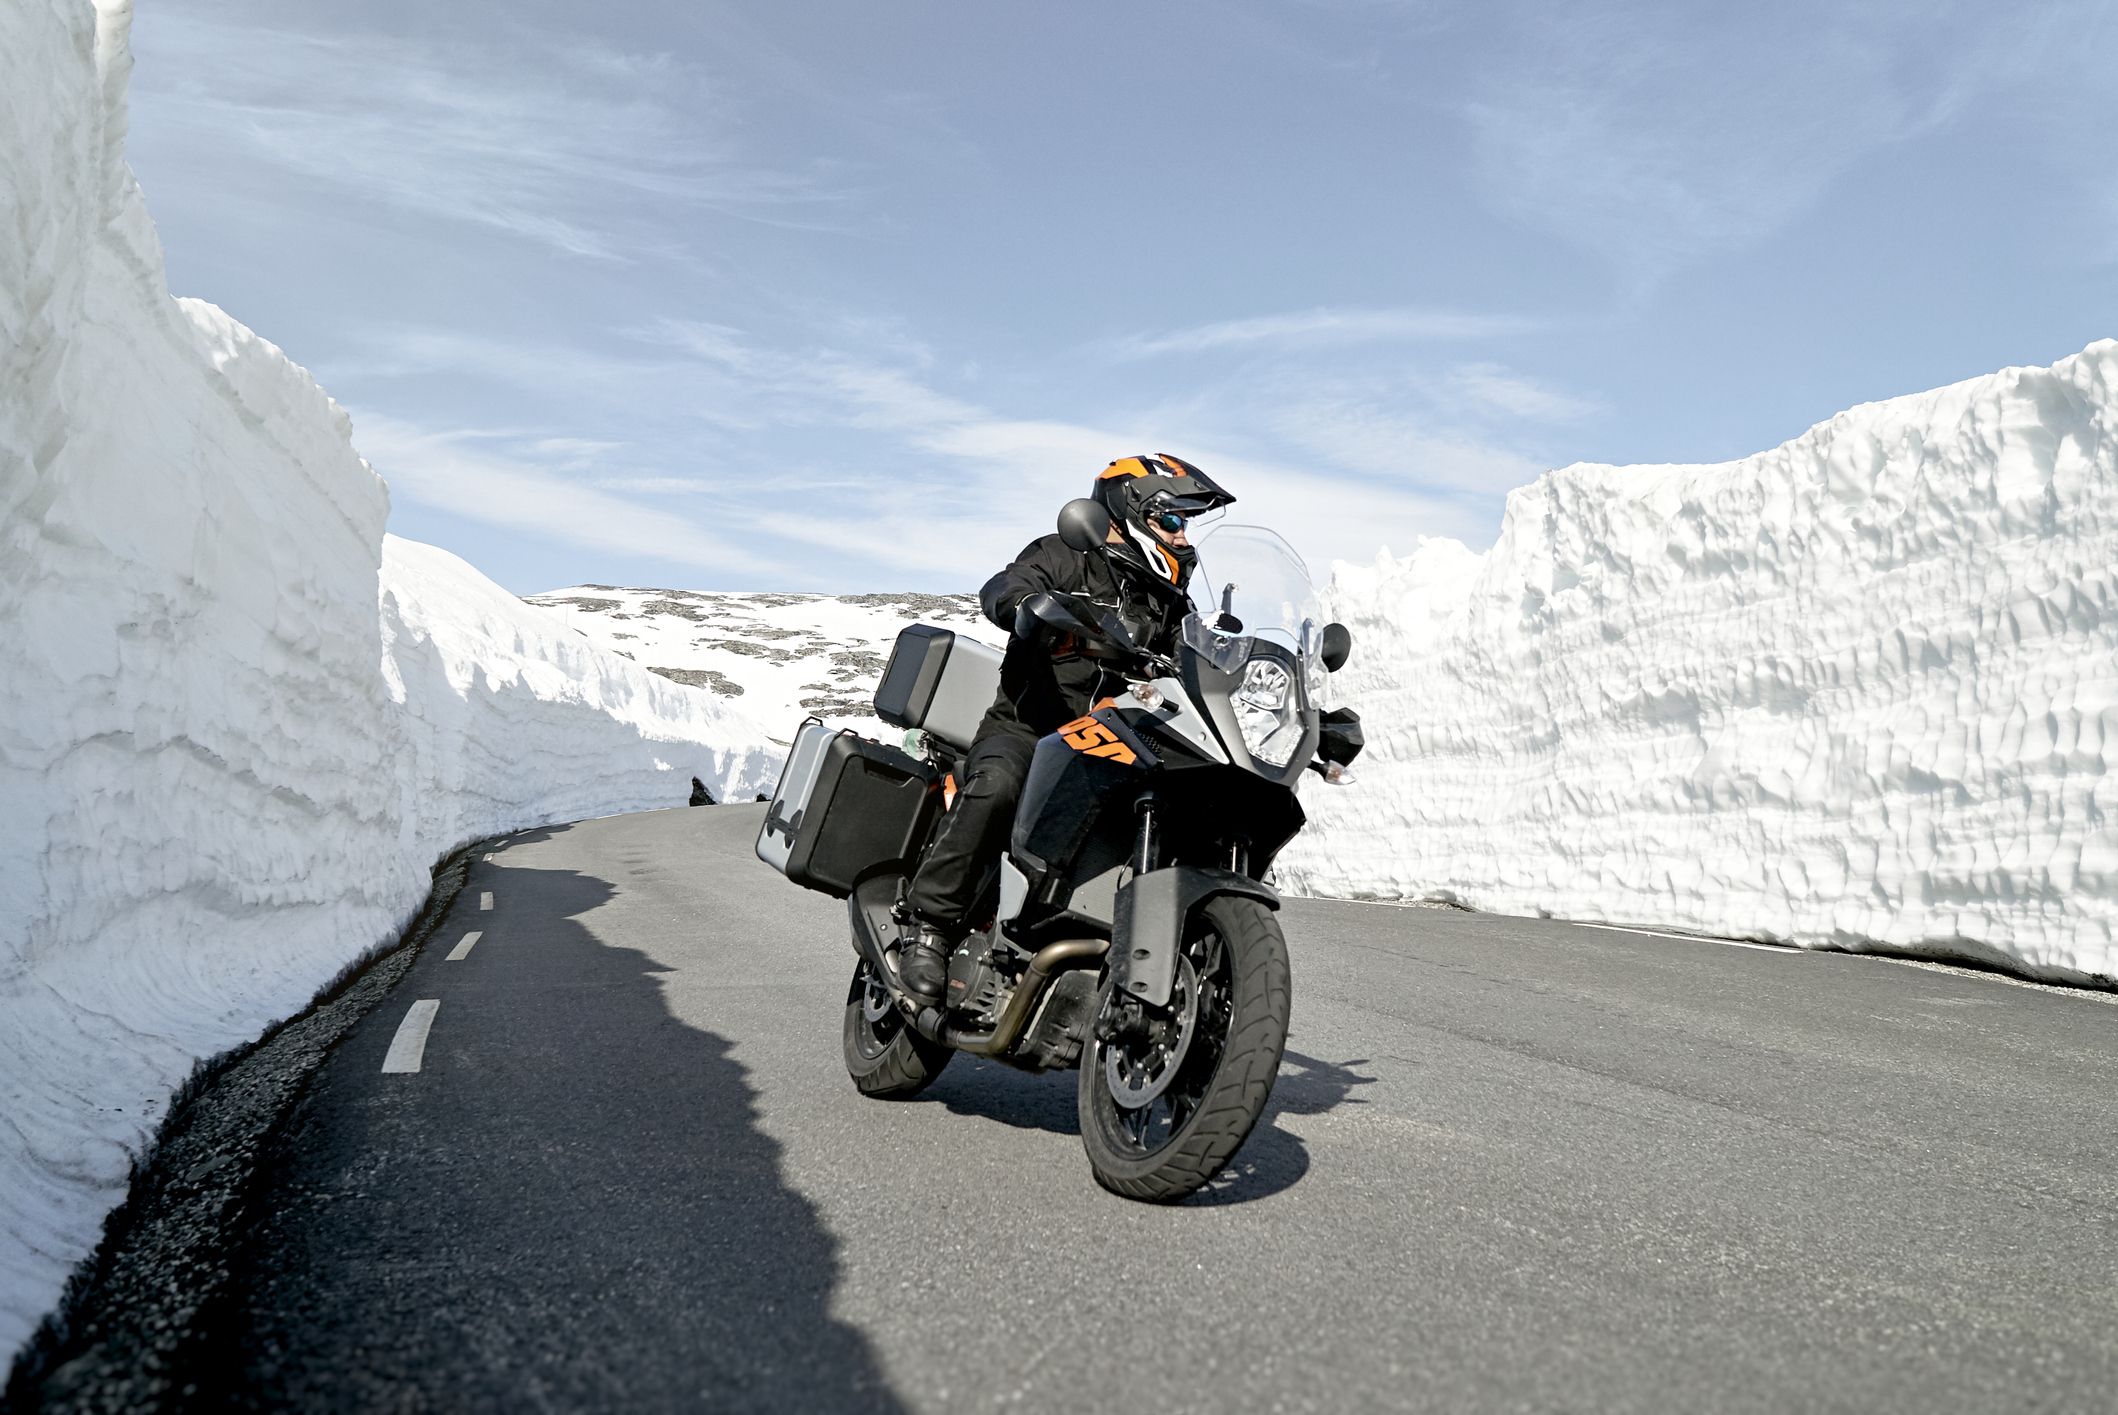 Riding Gear, Motorcycle Gear, Snow Gear, and More